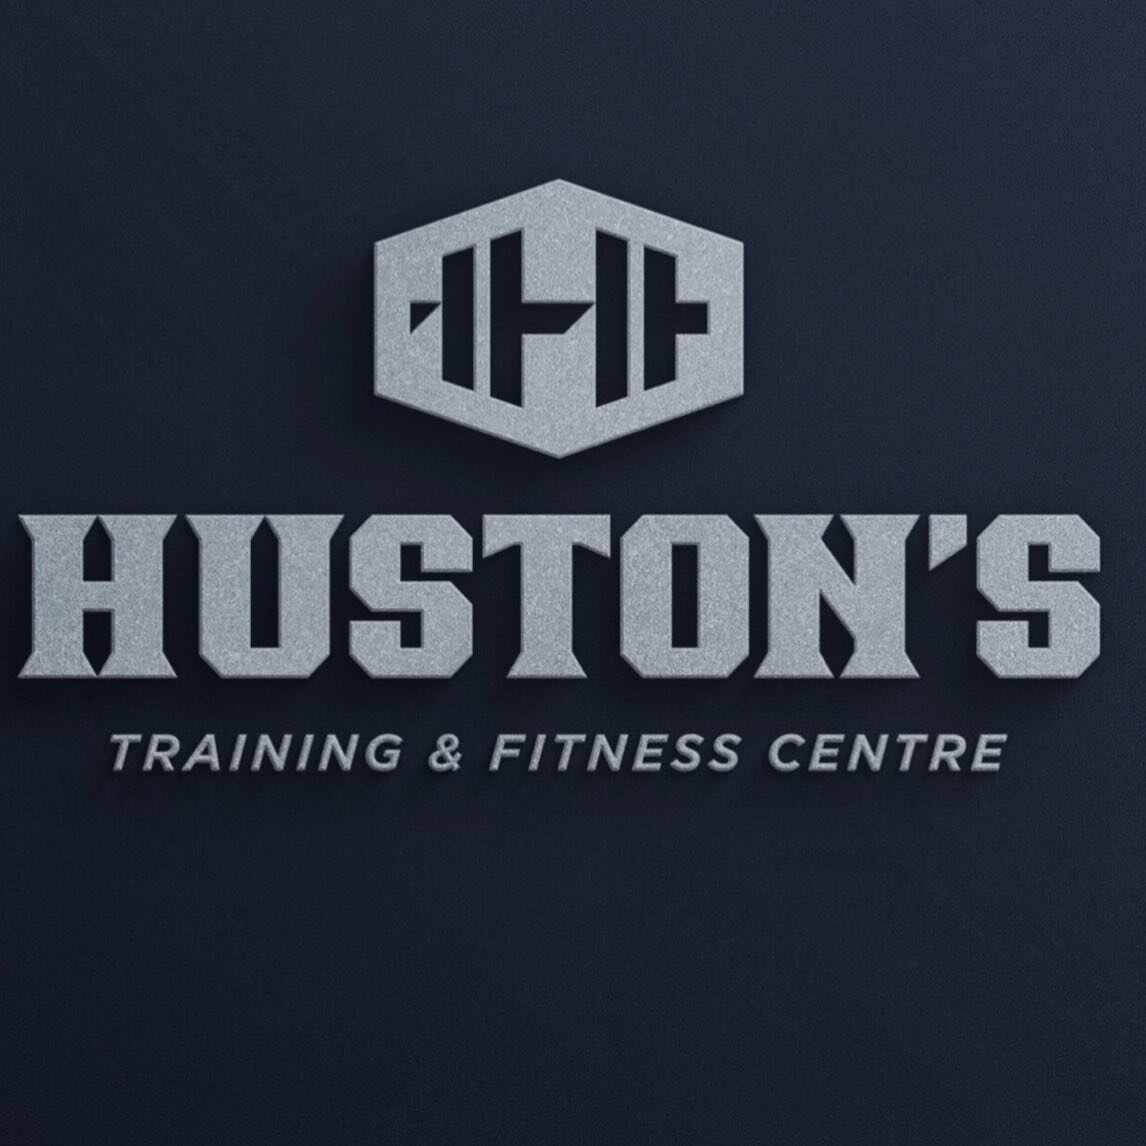 ⭐️ 3rd time's a charm!!! ⭐️

#HustonsTFC Team, as of Friday, July 16th WE ARE OPEN! 👏🏻👏🏼👏🏽👏🏾👏🏿

Booking goes live at midnight tonight at: ➡️ www.hustonstfc.com/book-now ⬅️ (link in bio)

‼️ Pre-lockdown rules still apply:
- Masks are mandat